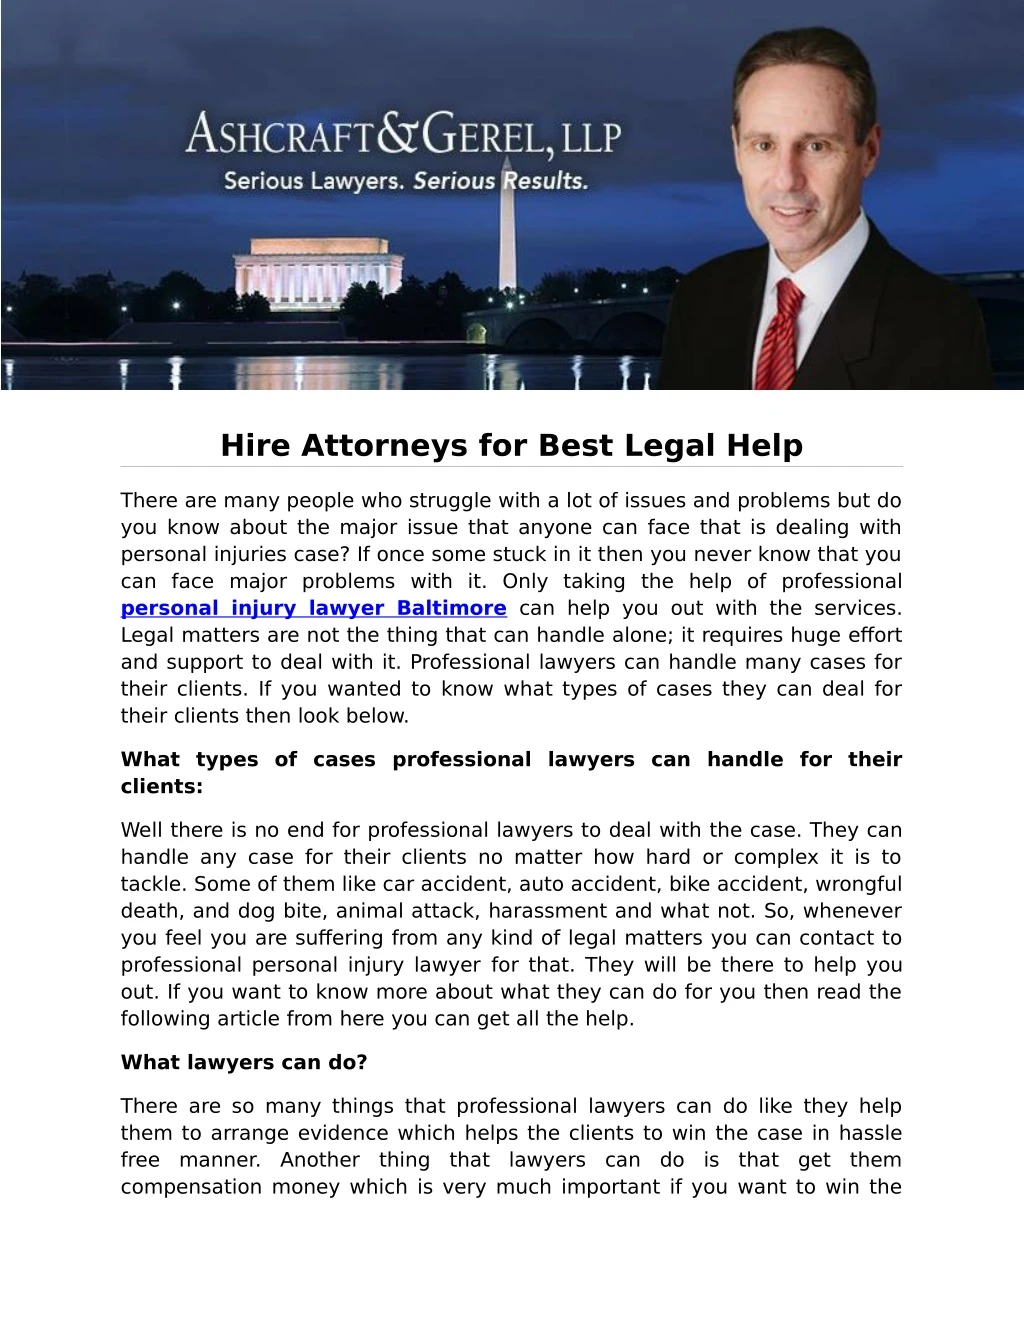 hire attorneys for best legal help